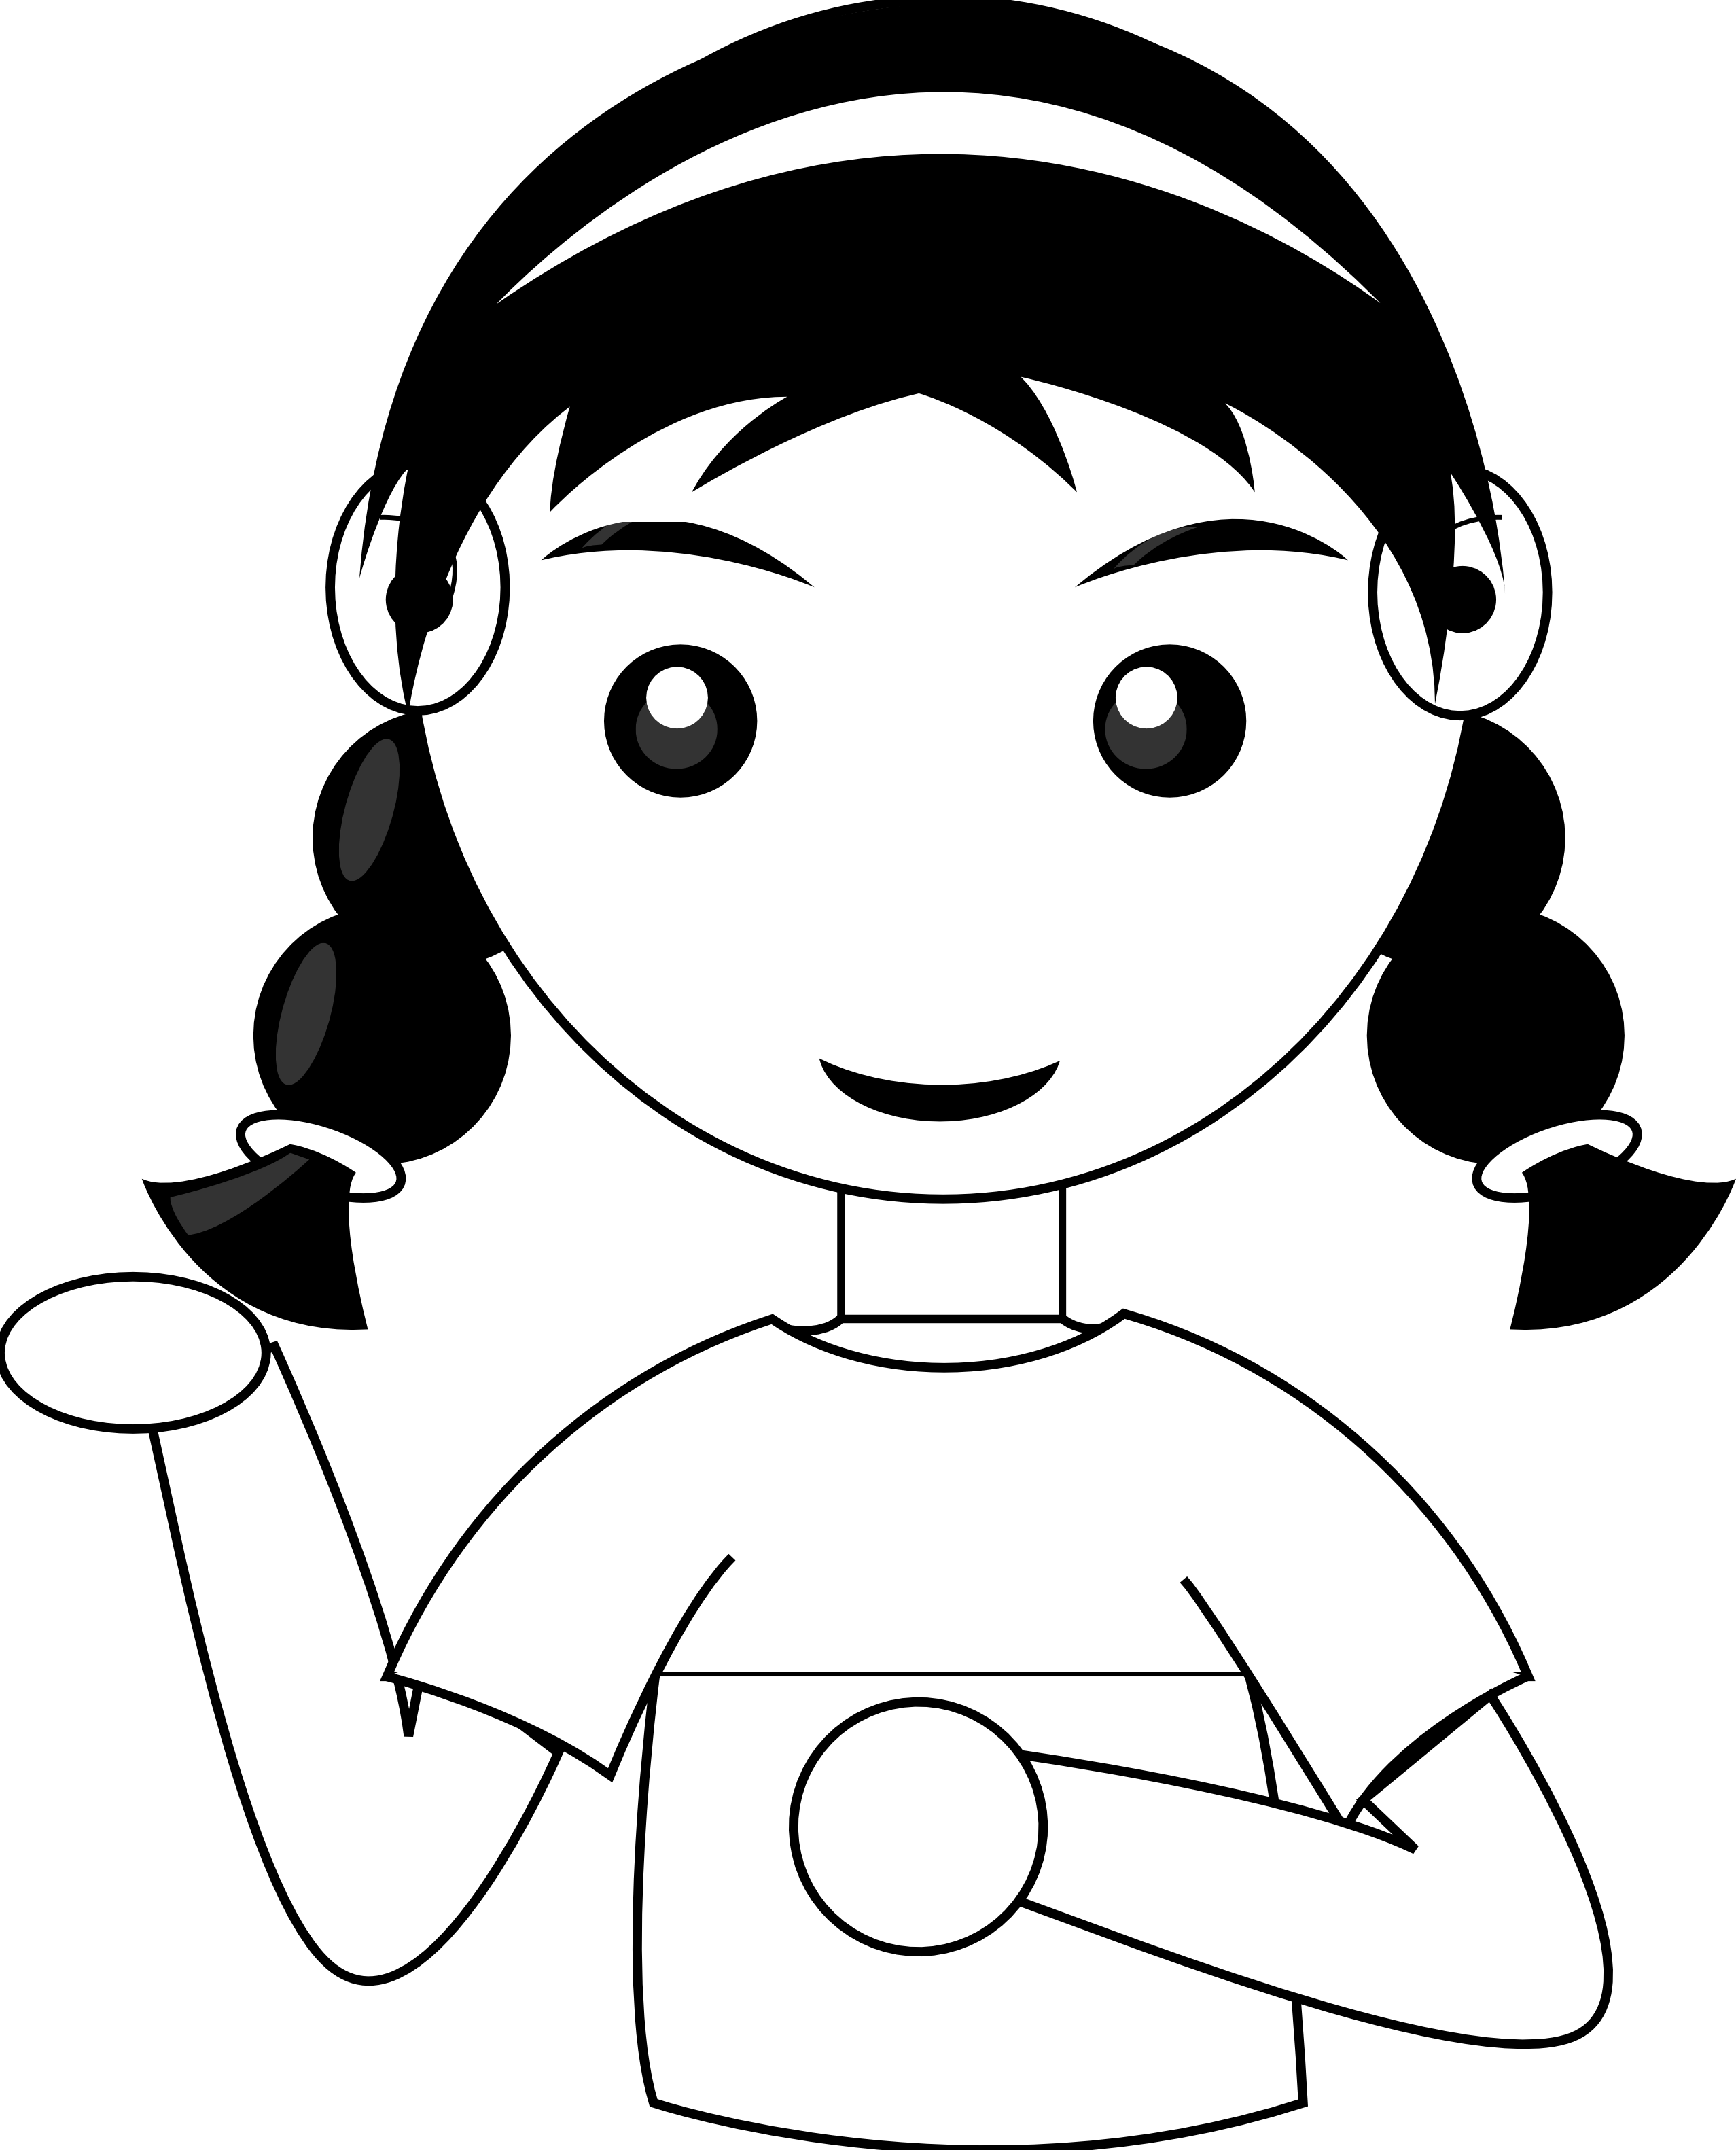 lady clipart black and white